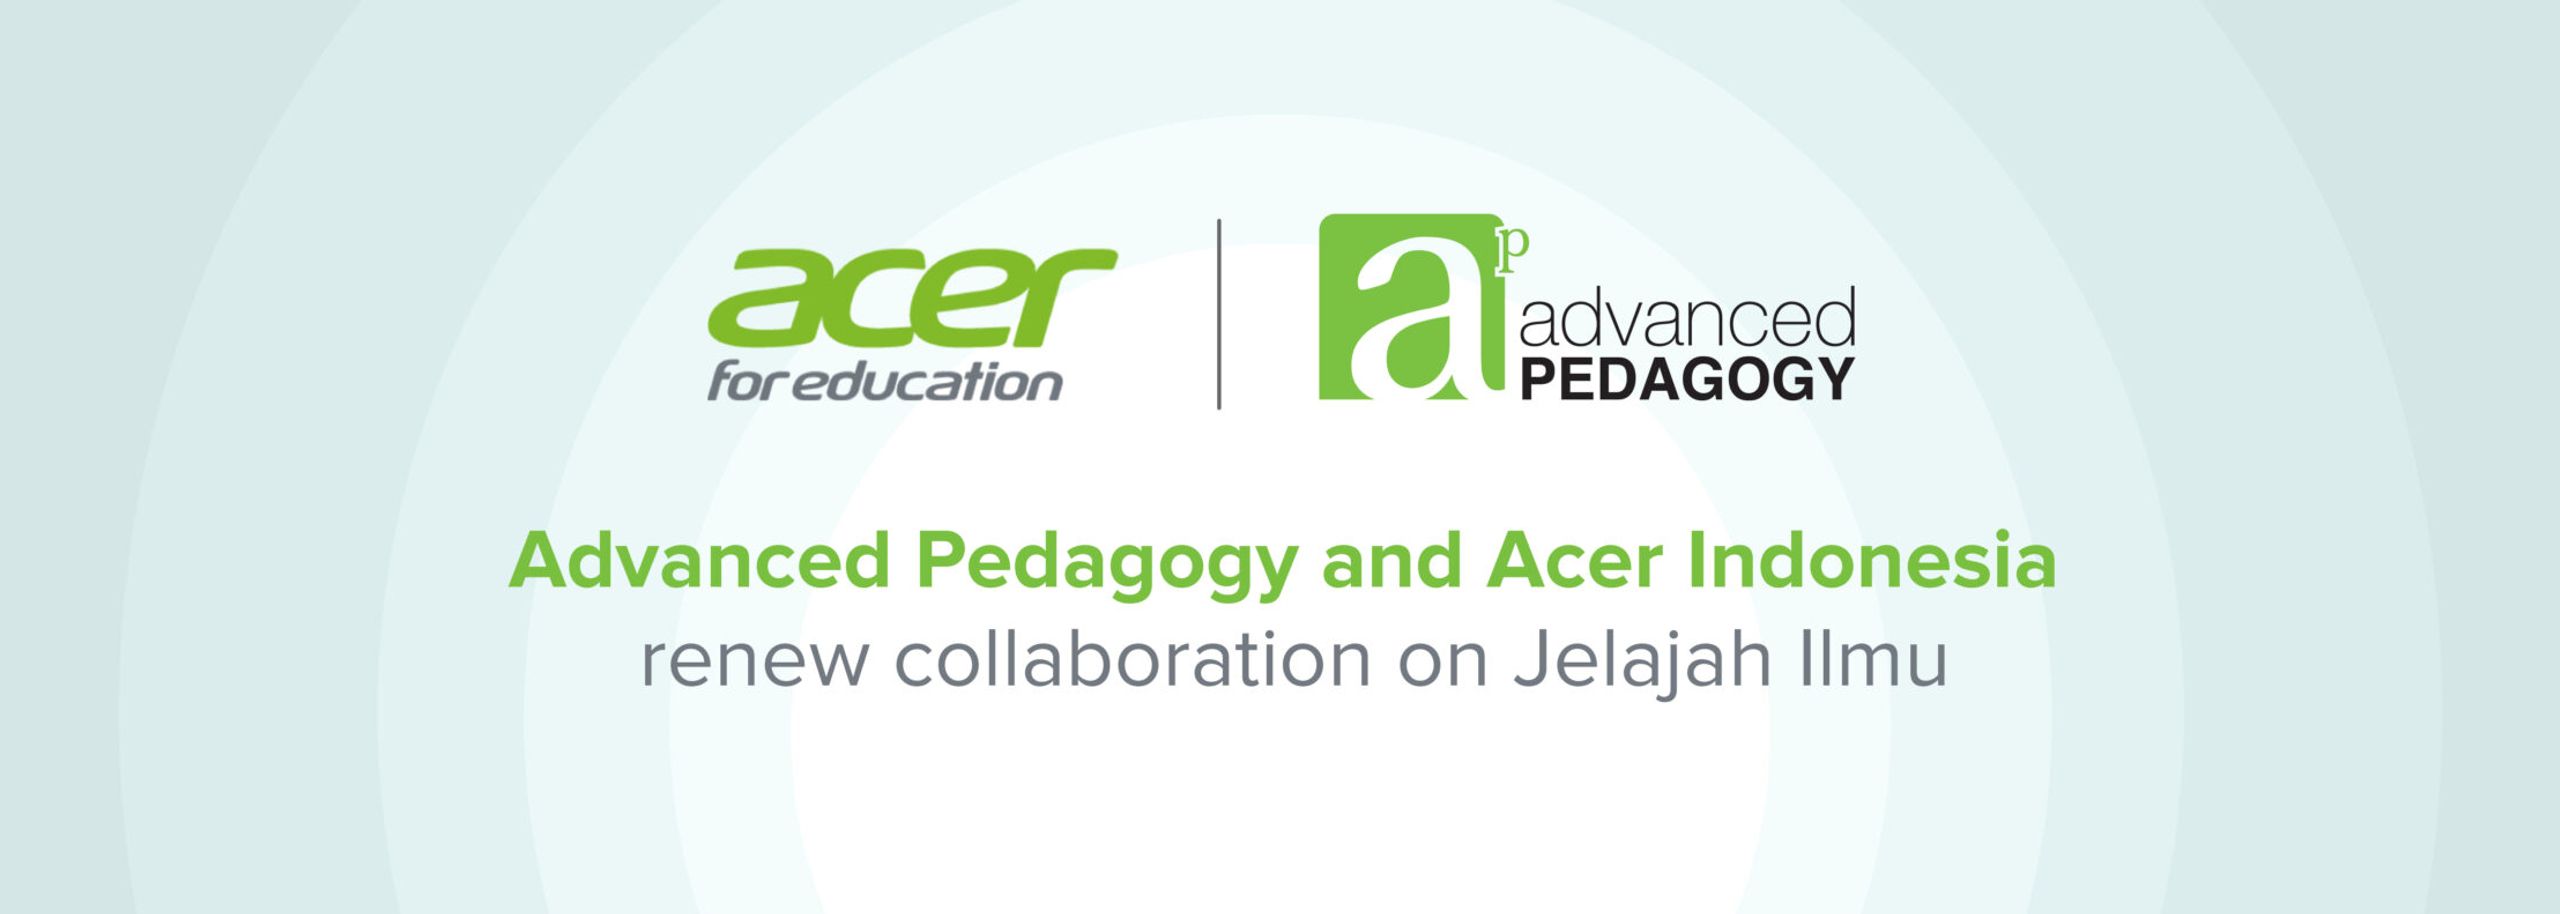 AP and Acer Indonesia renew collaboration on Jelajah Ilmu